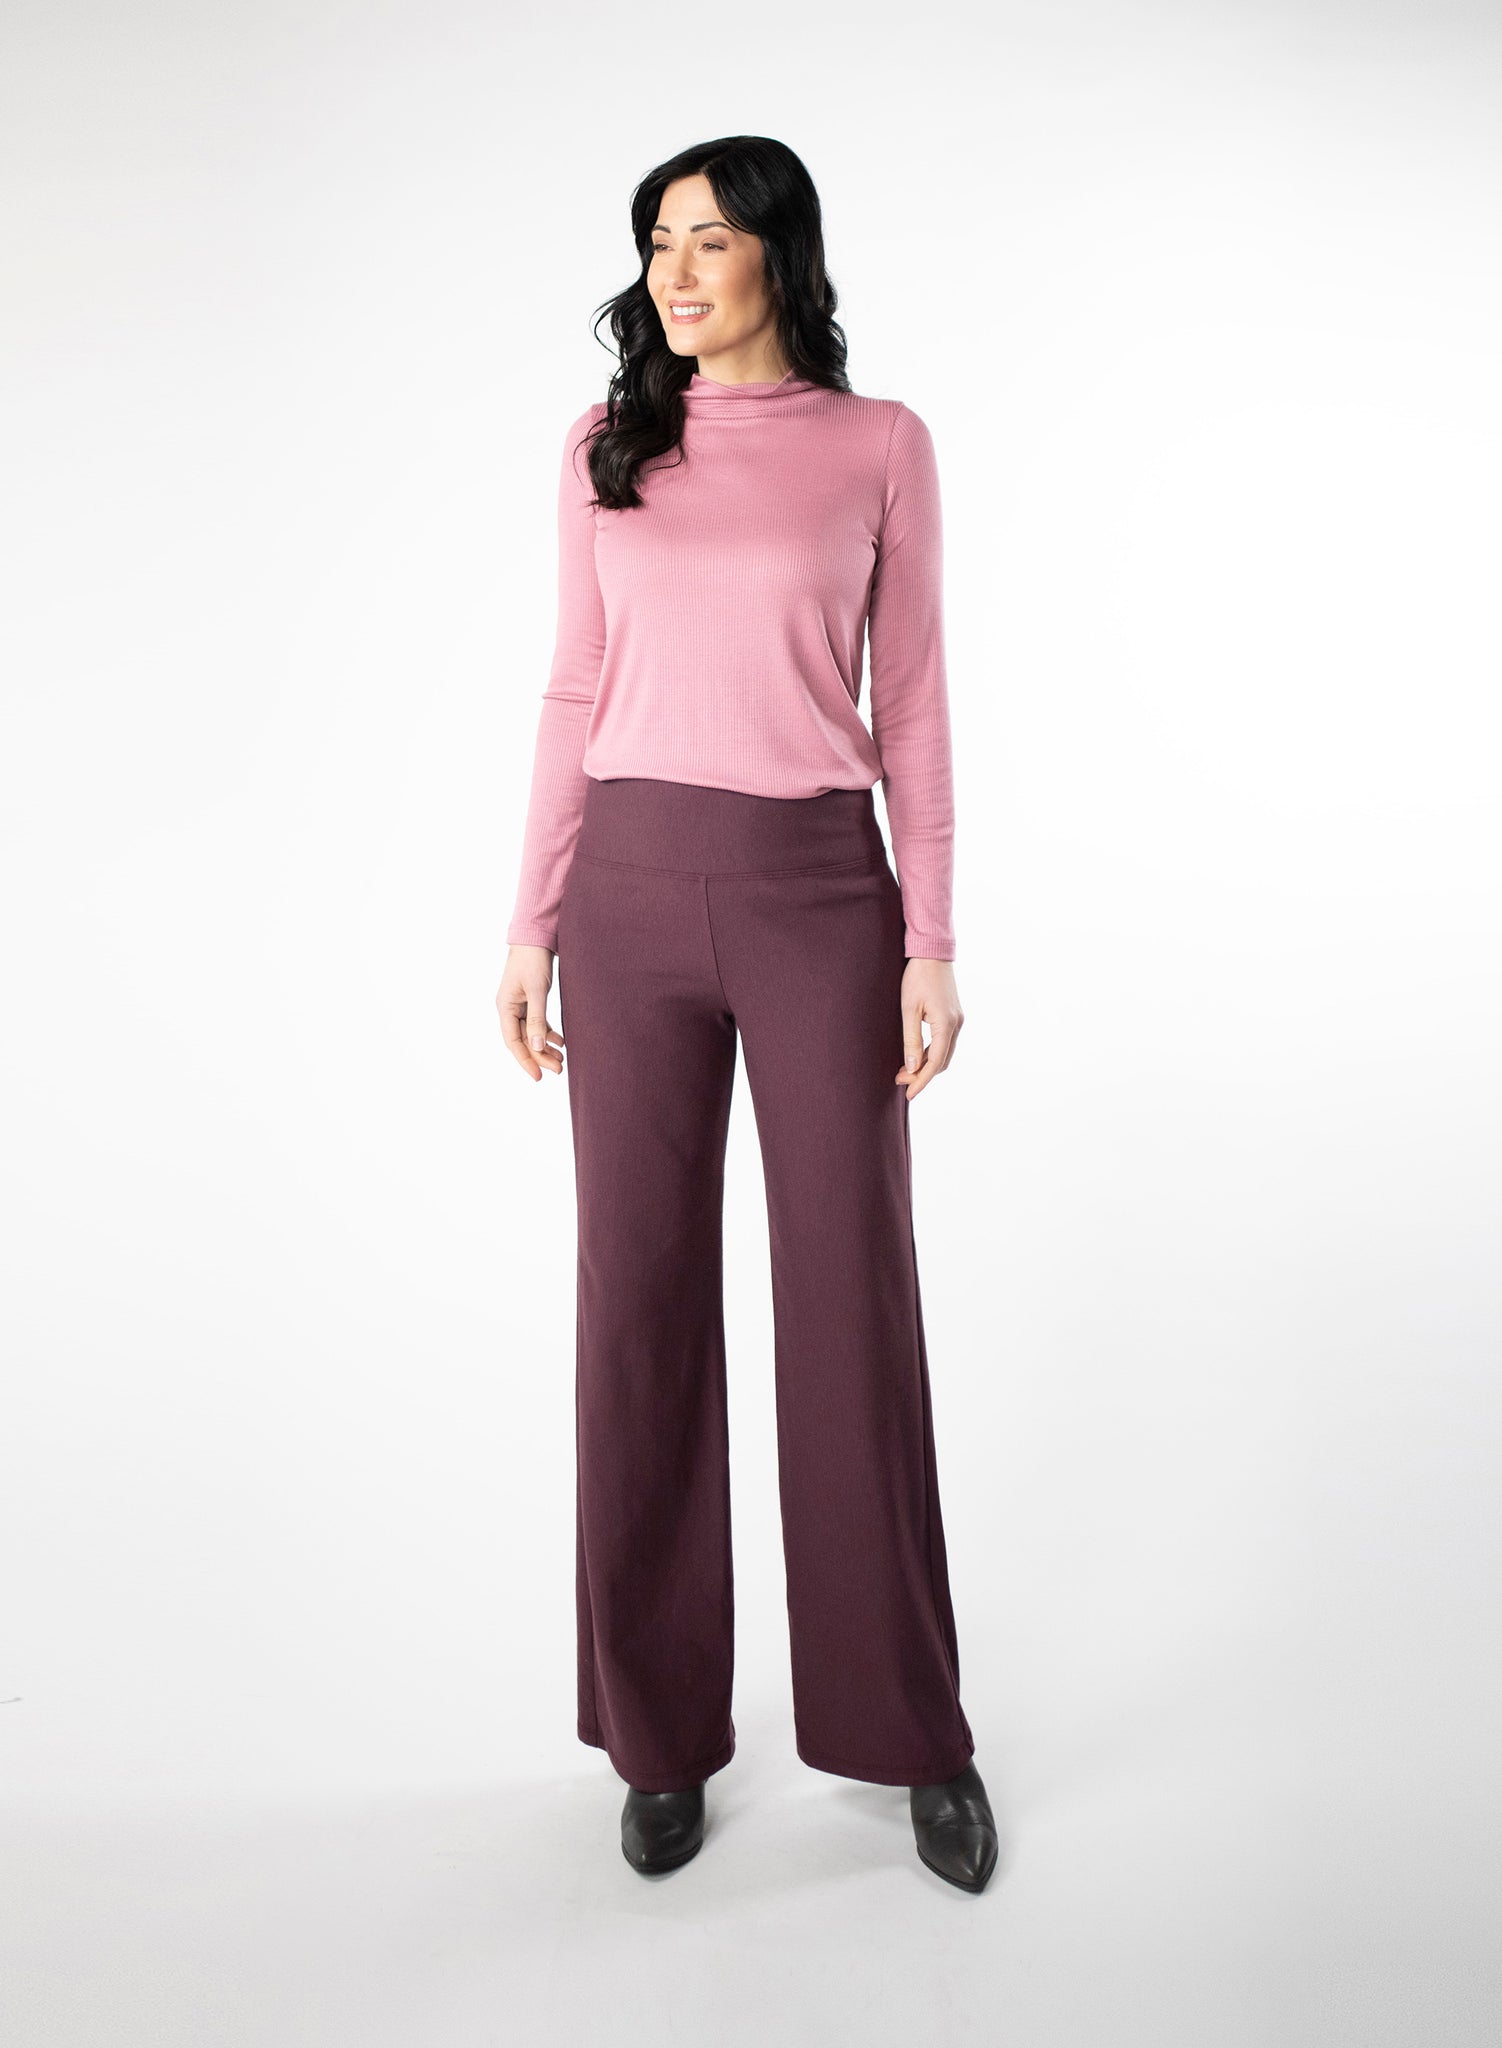 Plum Fleece wide leg pants. Wide waistband for support and coverage. Styled with a pink ribbed mock neck. Bamboo and Cotton Fleece fabric. 